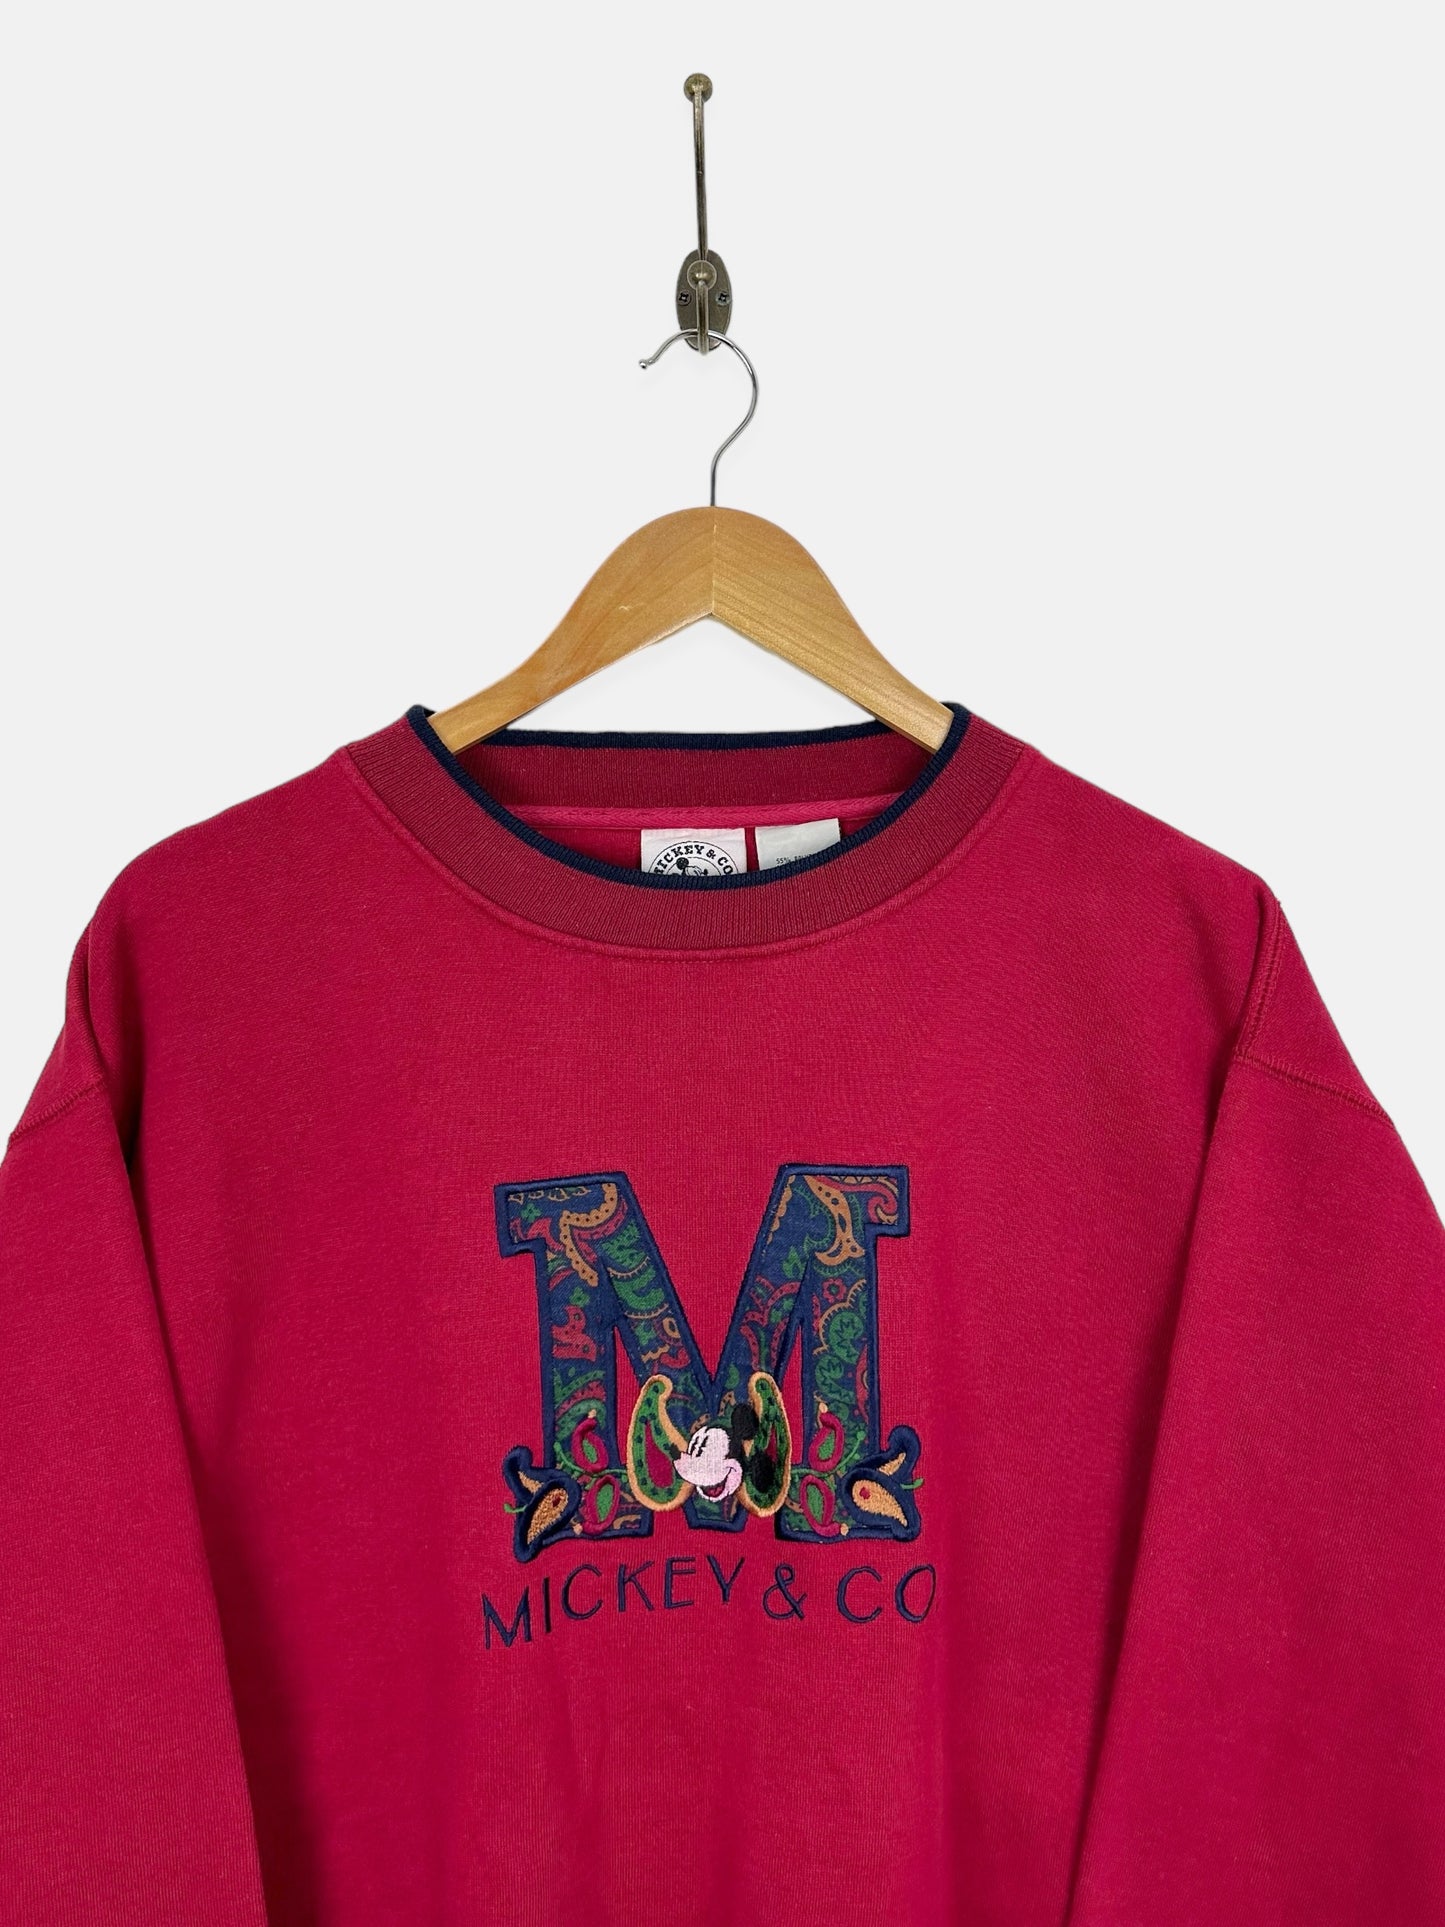 90's Disney Mickey Mouse Embroidered Vintage Sweatshirt Size XL